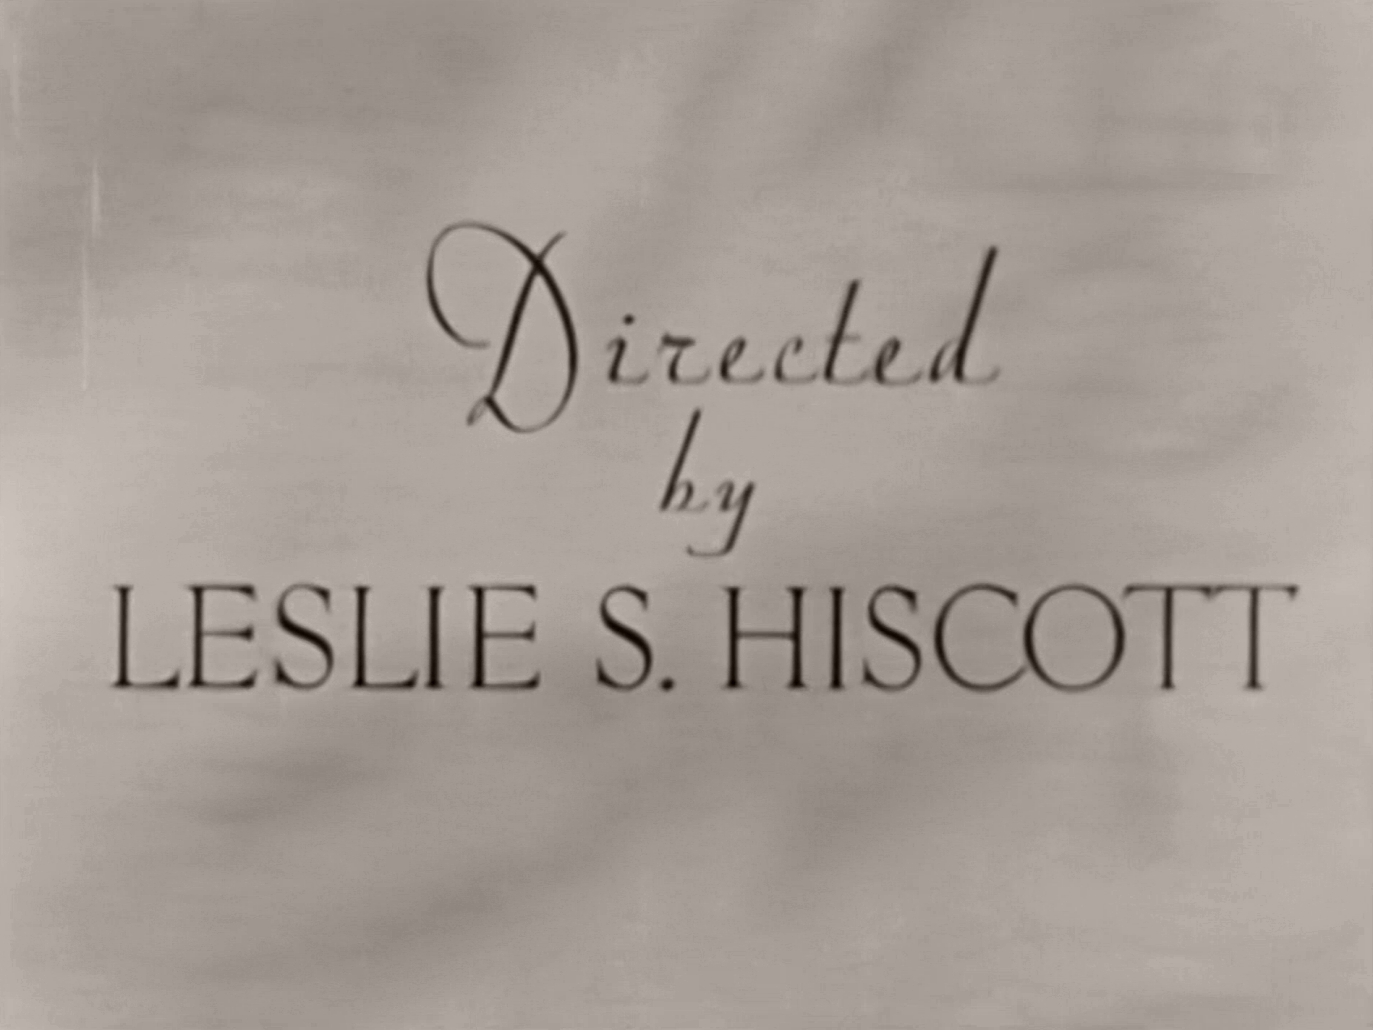 Main title from Sabotage at Sea (1942) (6). Directed by Leslie S Hiscott